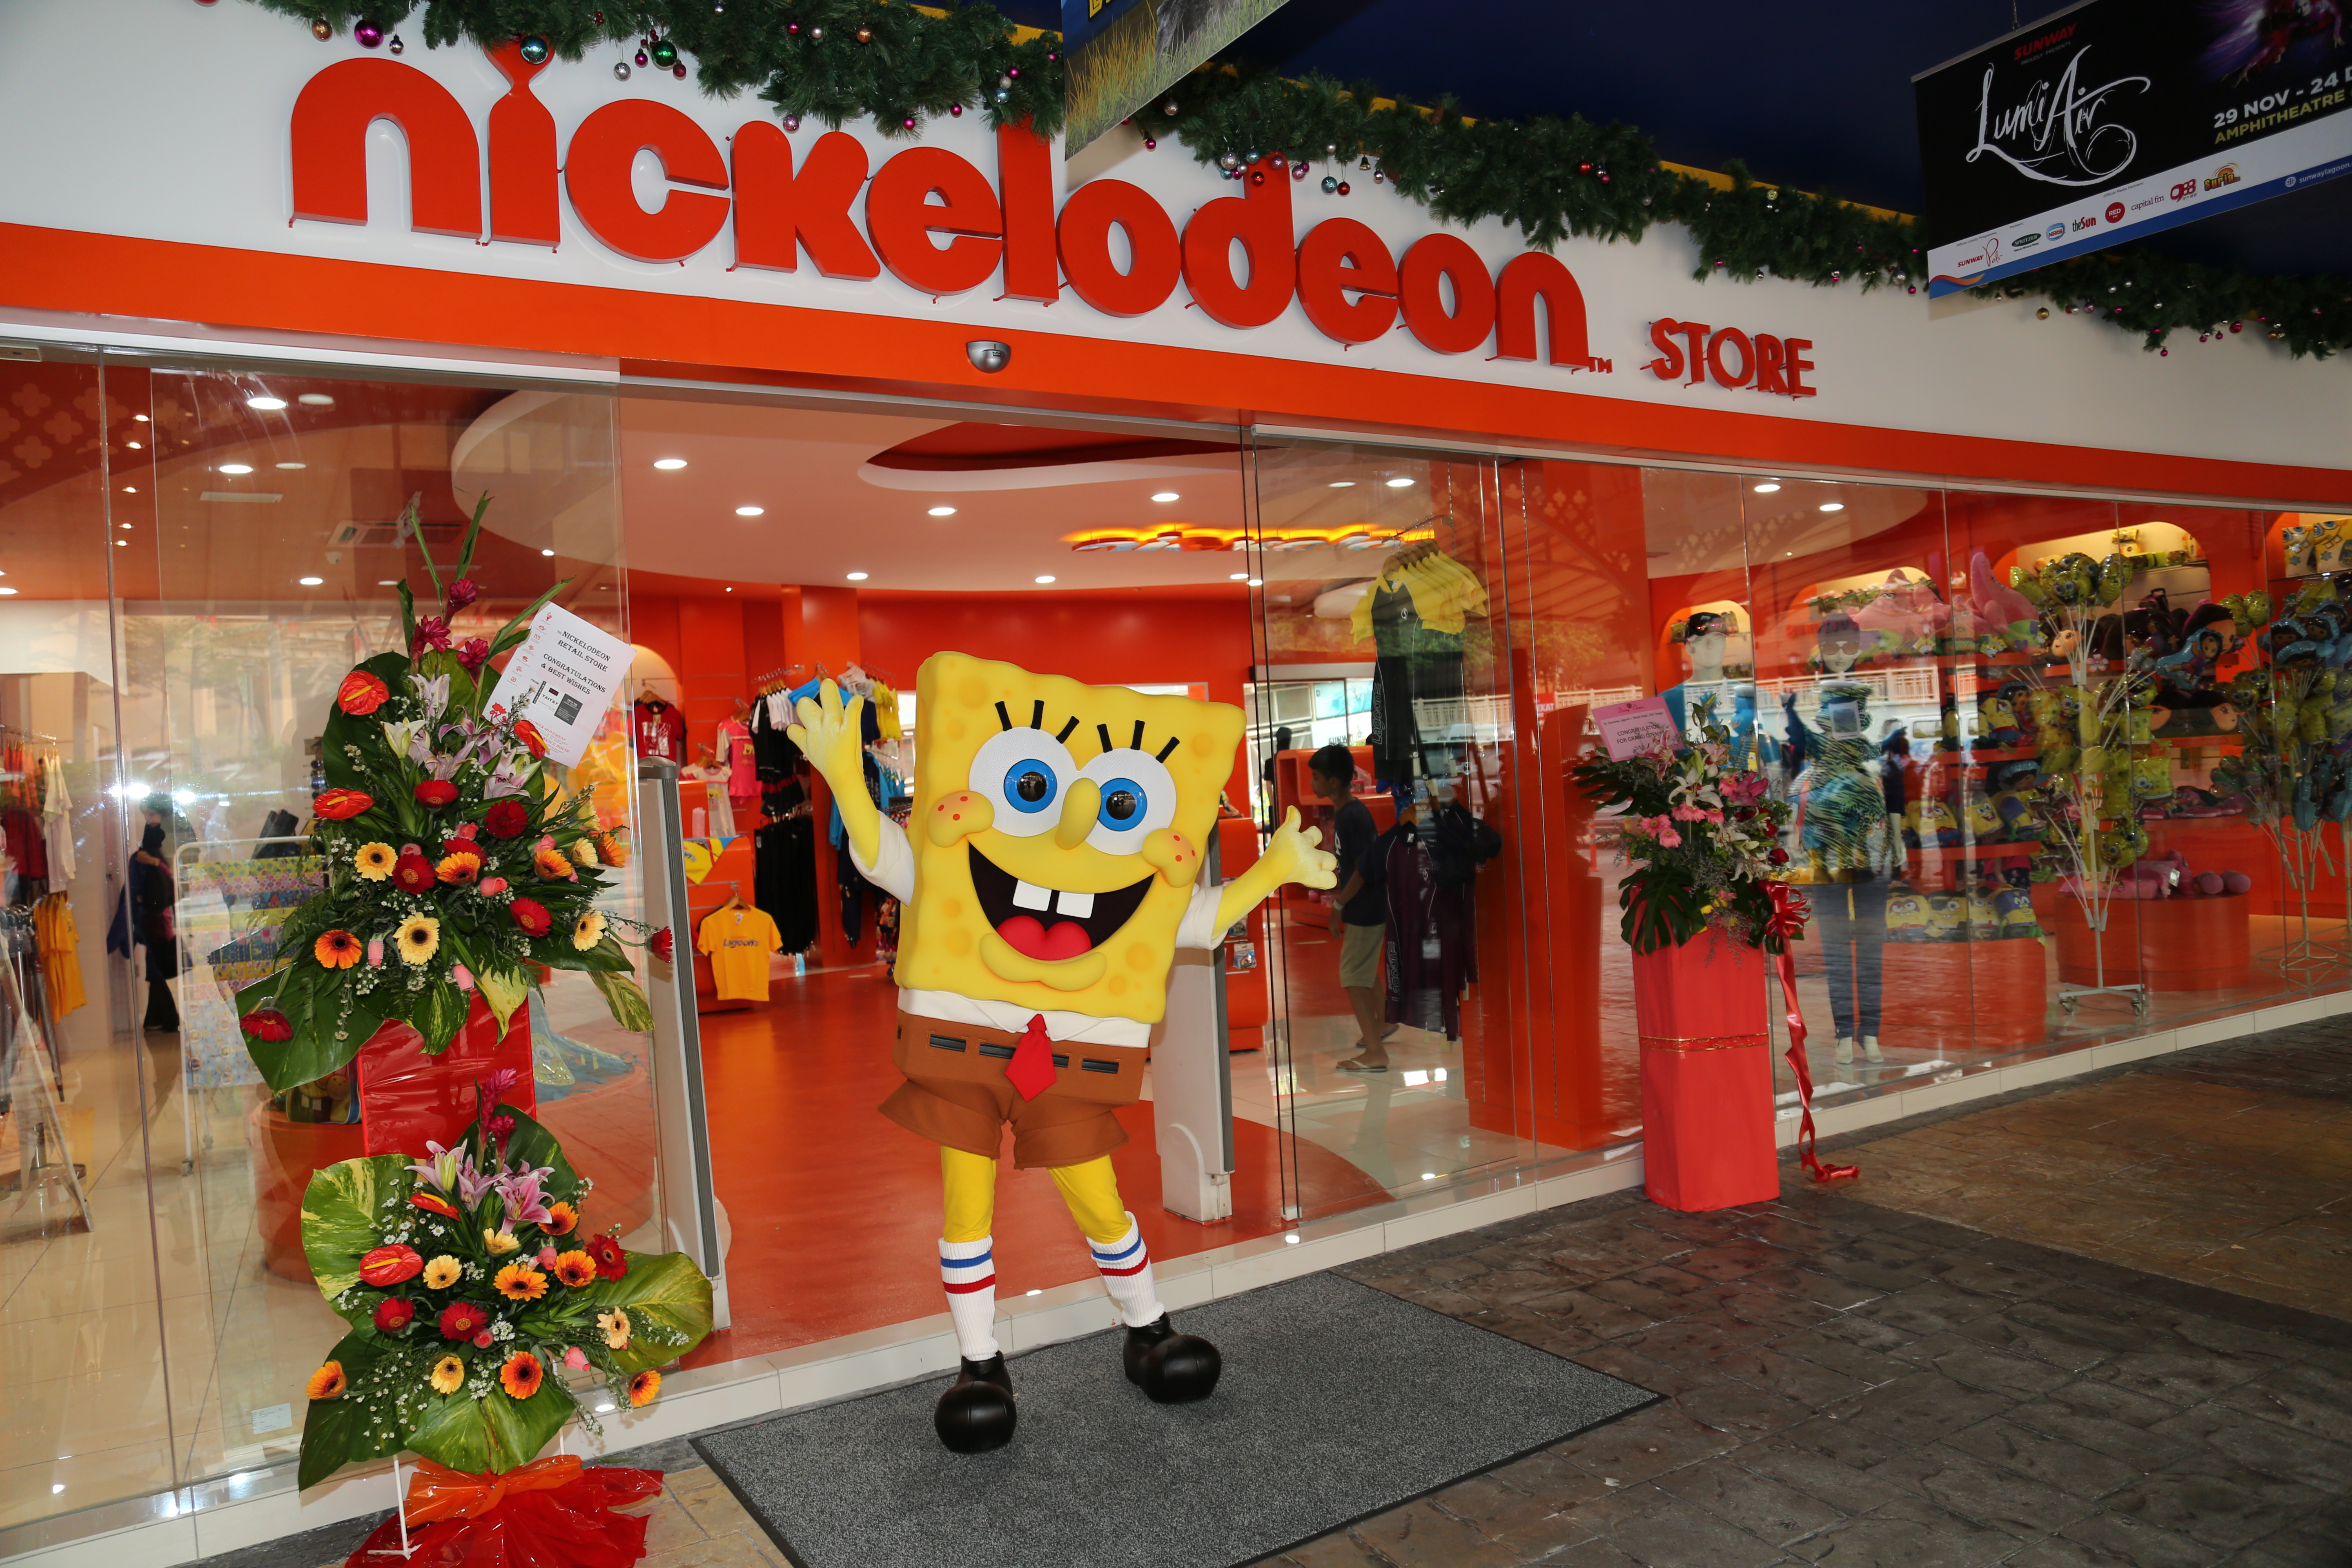 #Nickelodeon: Asia's First Nickelodeon-Themed Attraction ...